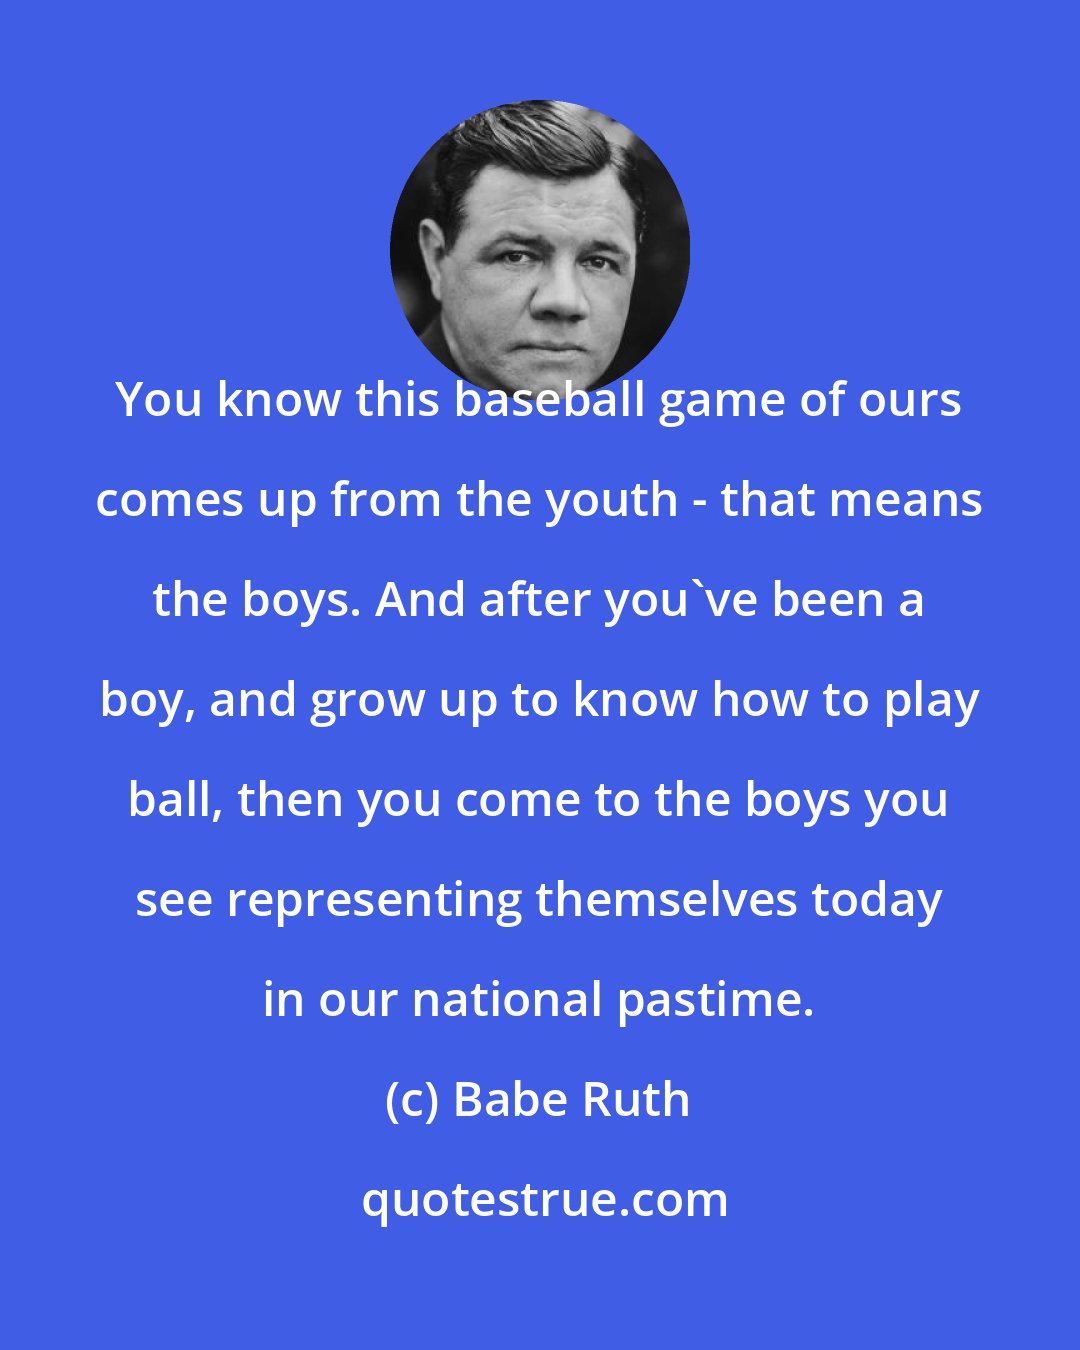 Babe Ruth: You know this baseball game of ours comes up from the youth - that means the boys. And after you've been a boy, and grow up to know how to play ball, then you come to the boys you see representing themselves today in our national pastime.